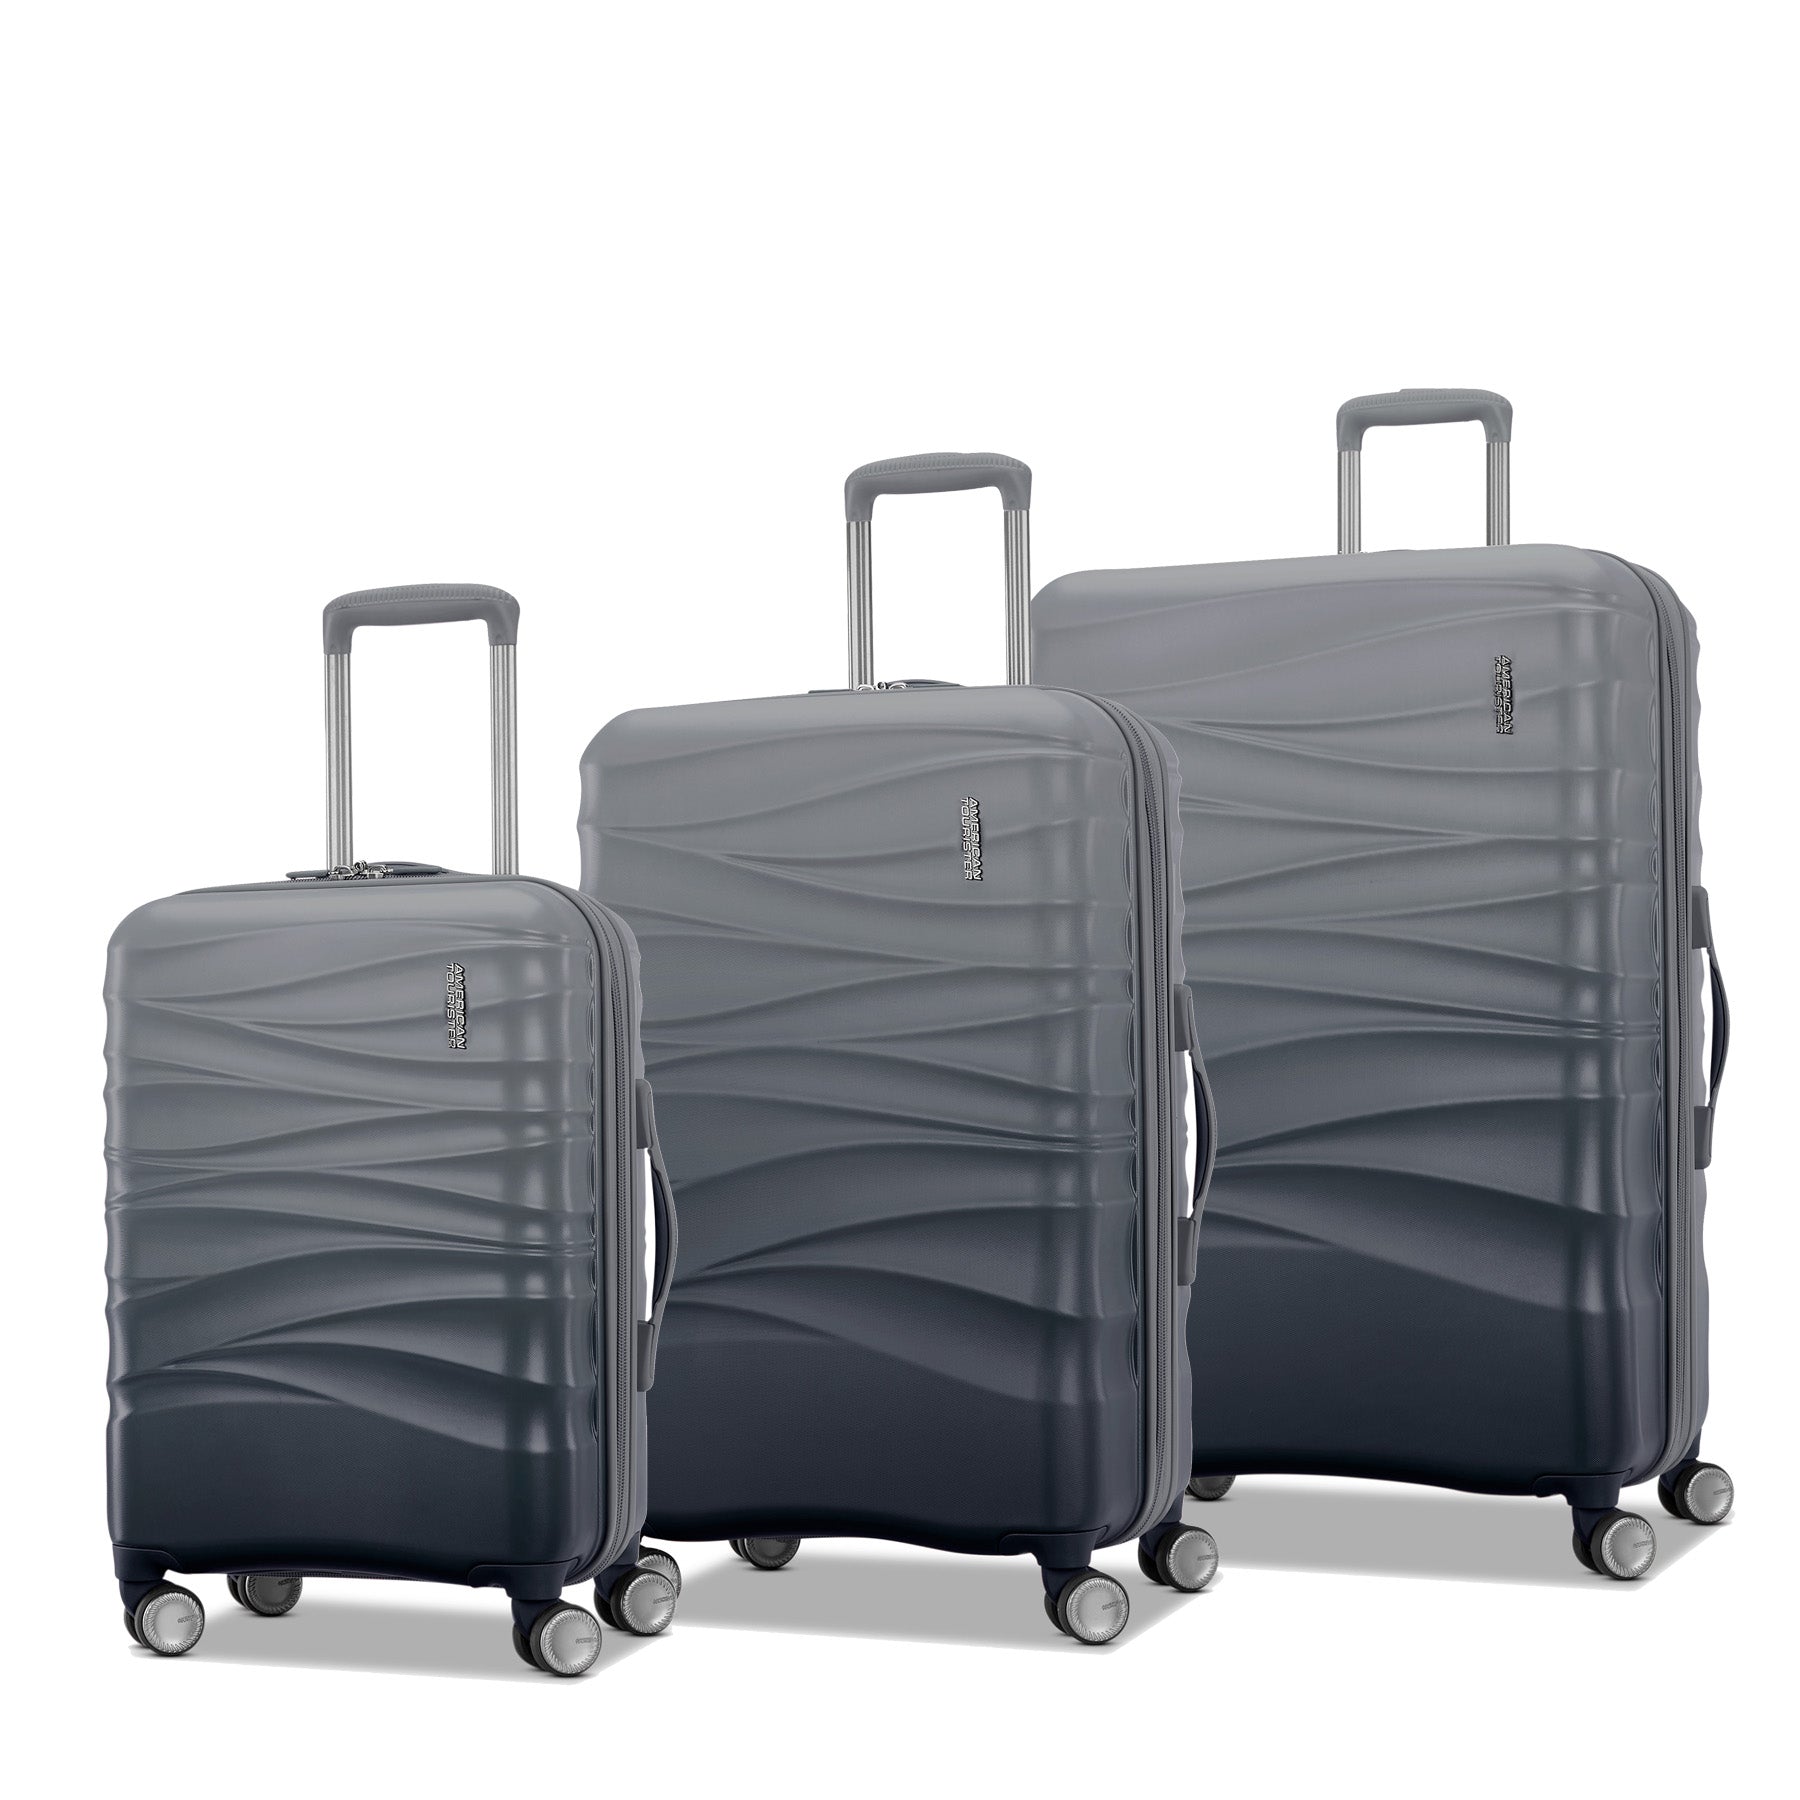 Luggage 3 PC SET Spinner Suitcase Travel Bag Trolley Carry On Suitcase 20  25 30 - Walmart.com